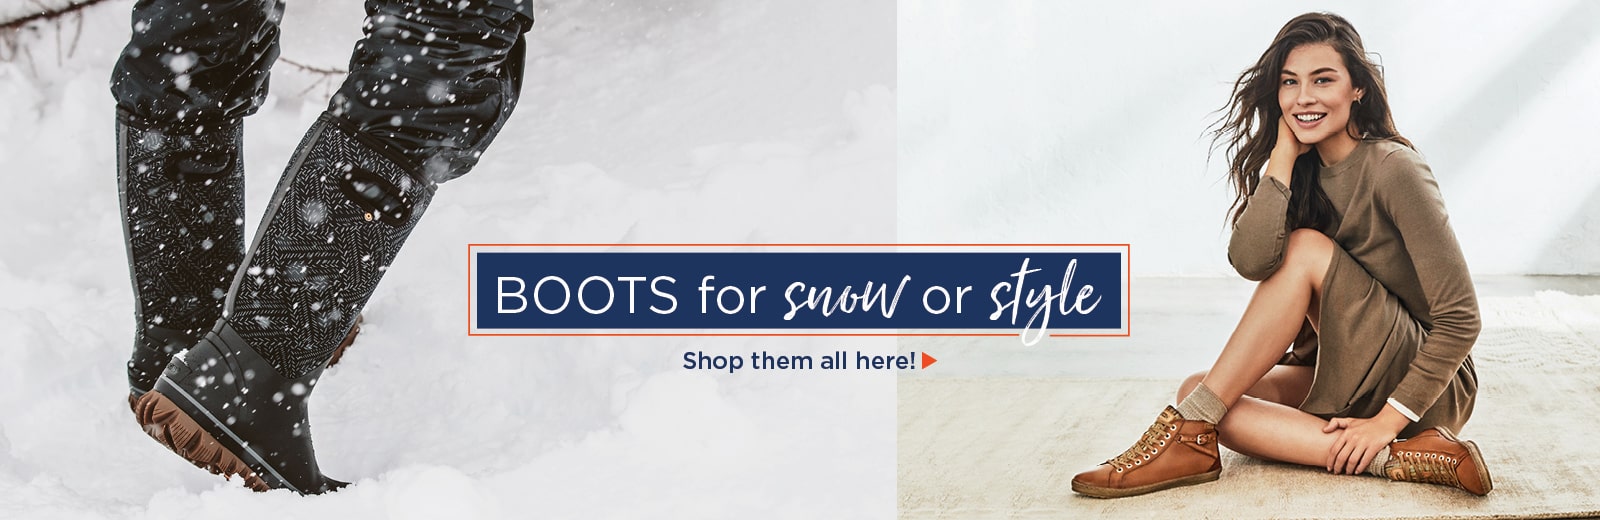 Shop Boots for Snow or Style - Click to Shop 